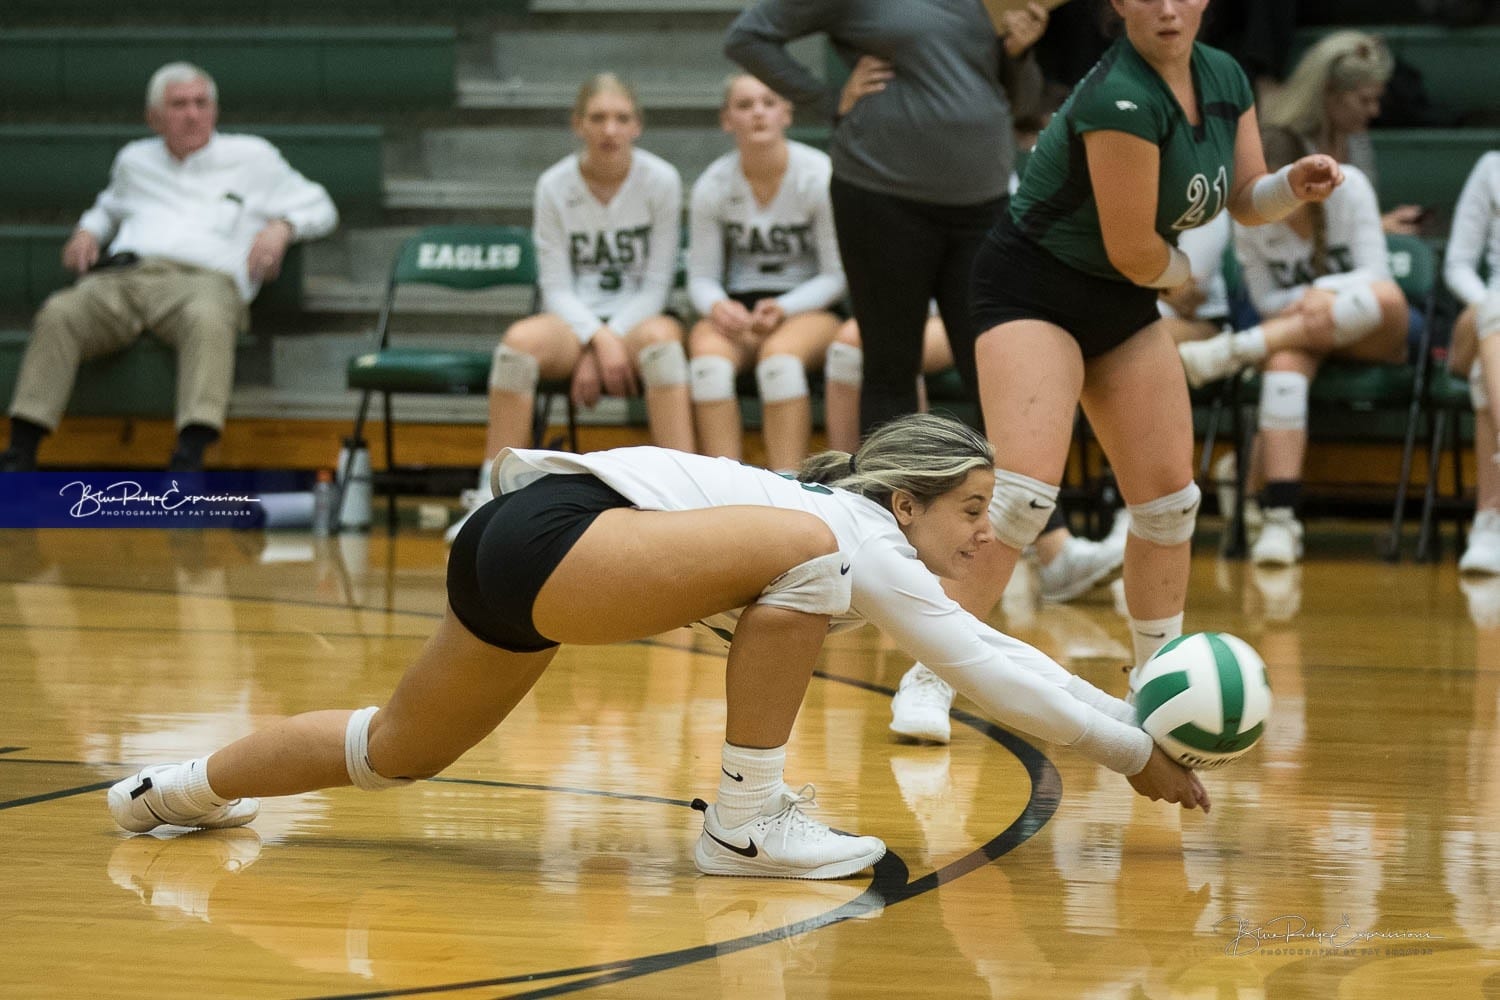 Volleyball: North Henderson visits East Henderson